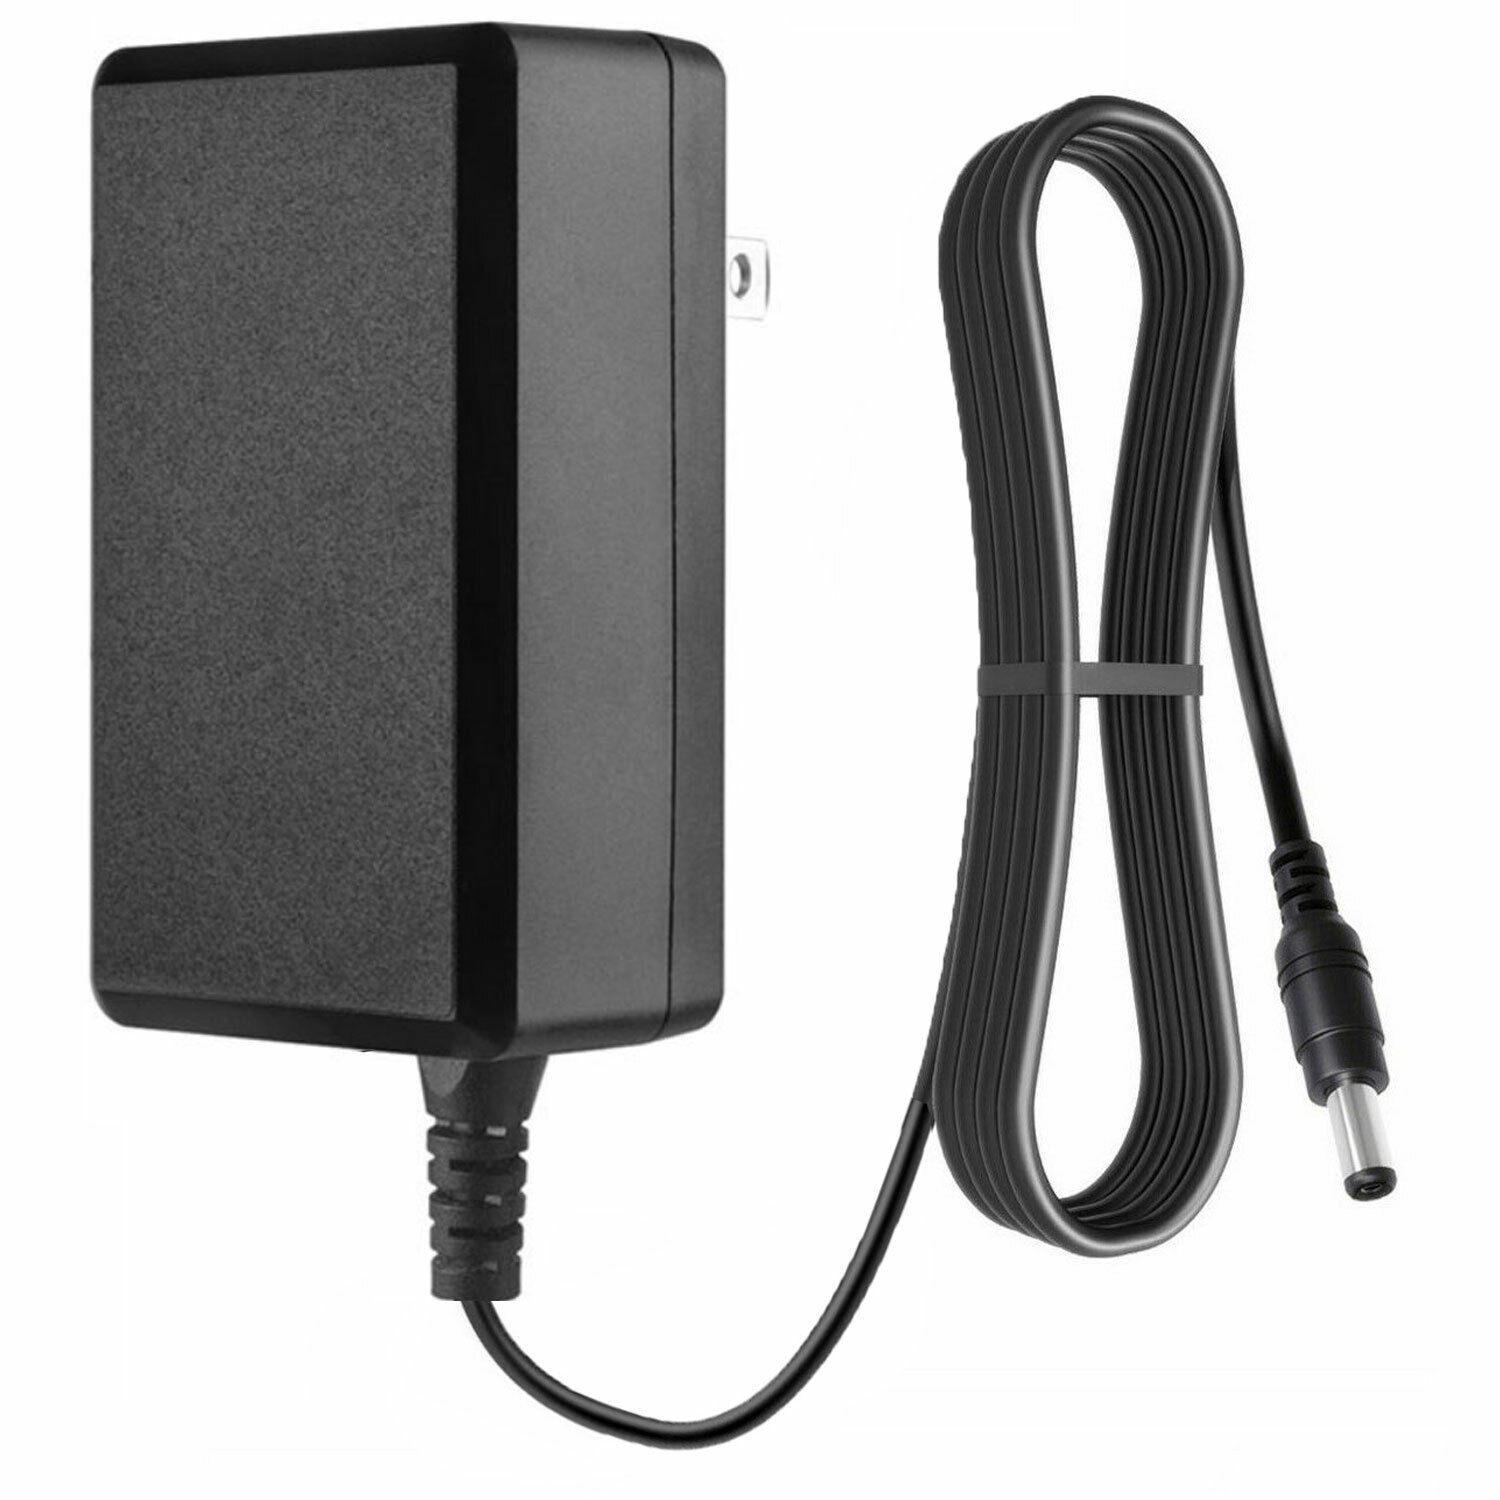 79005 79000 79010 AC Adapter for Andis Supra ZR 2 II Detachable Blade Clipper #79072 79066 201246 - Click Image to Close